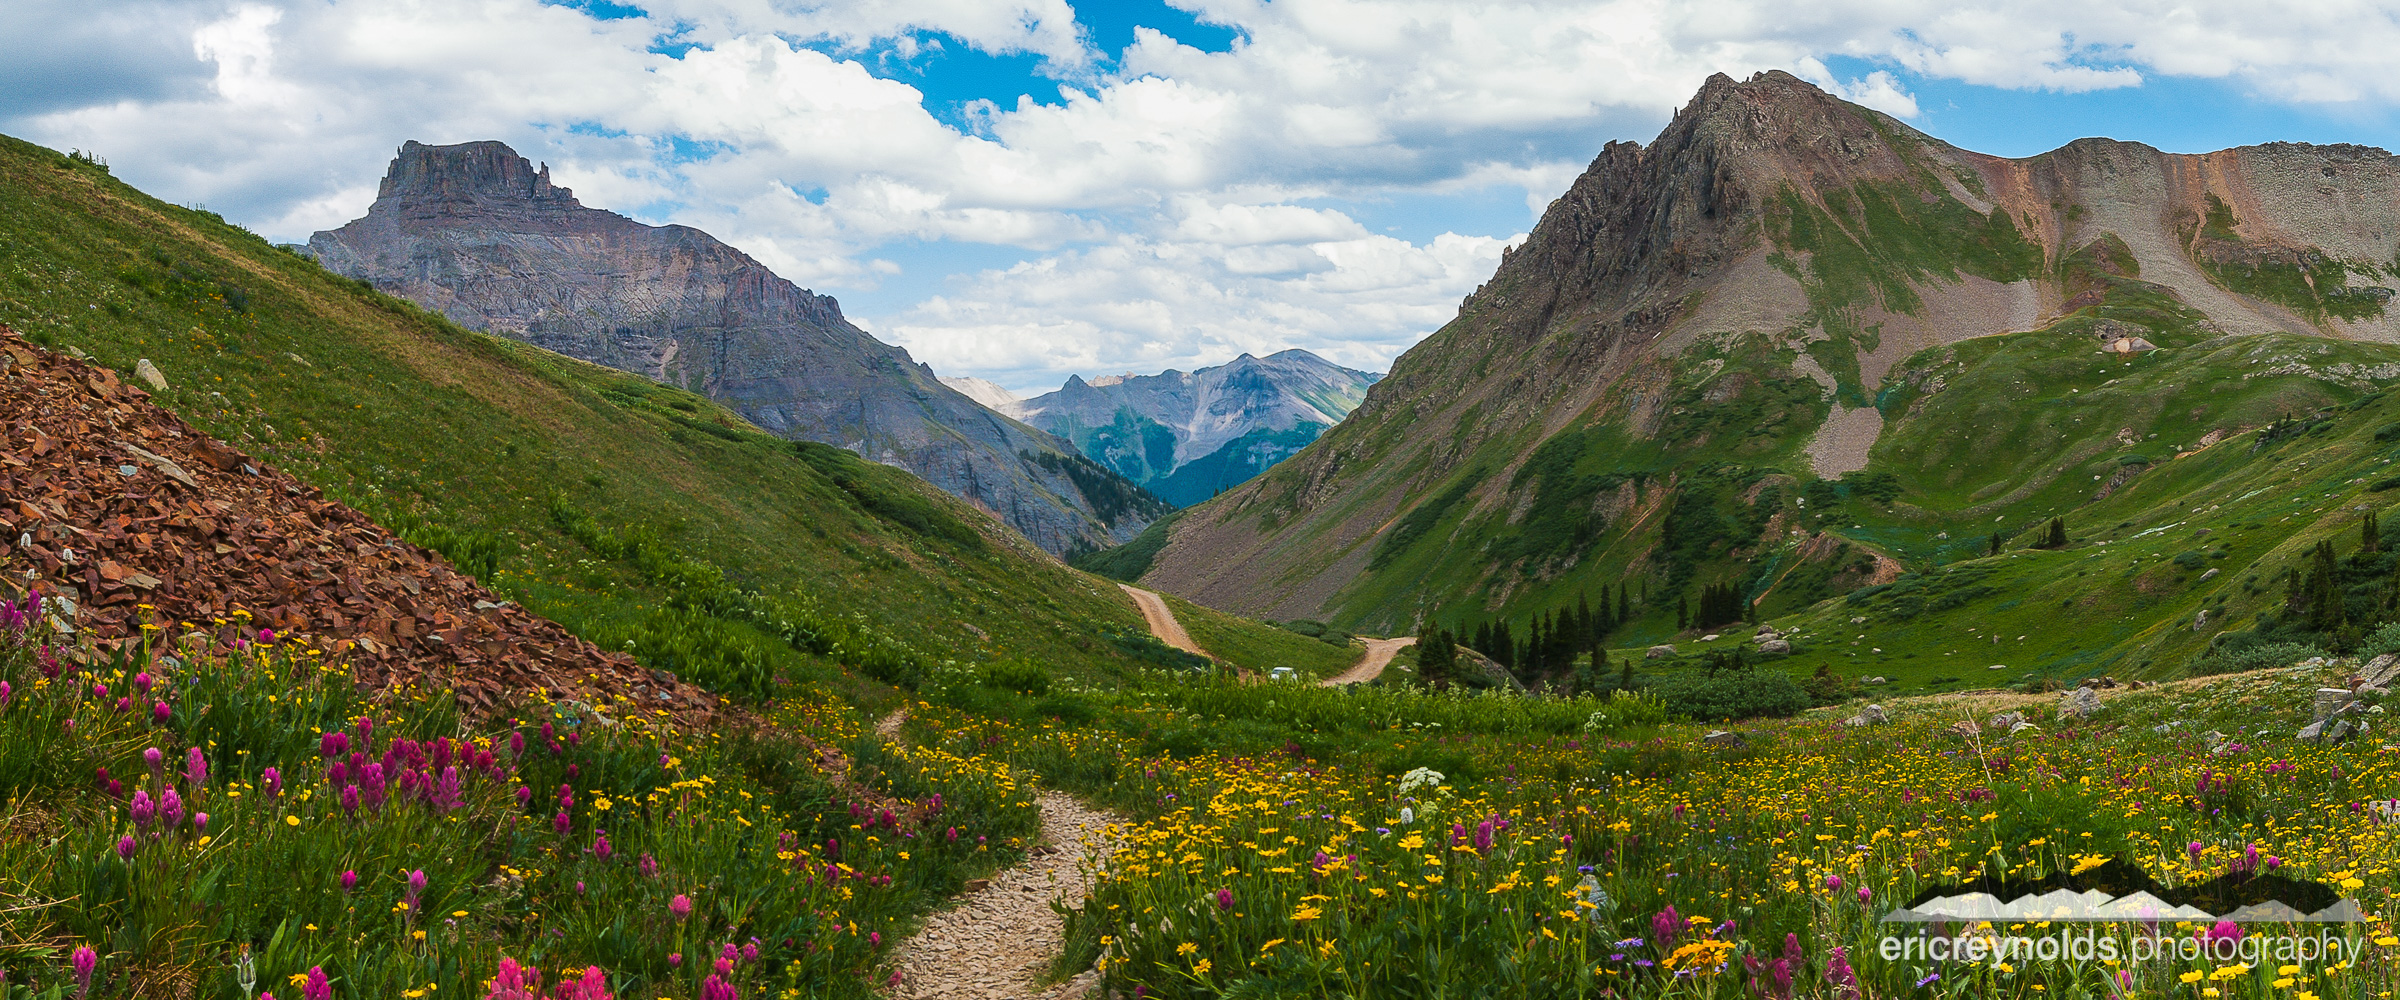 Wildflower Path 2 by Eric Reynolds - Landscape Photographer